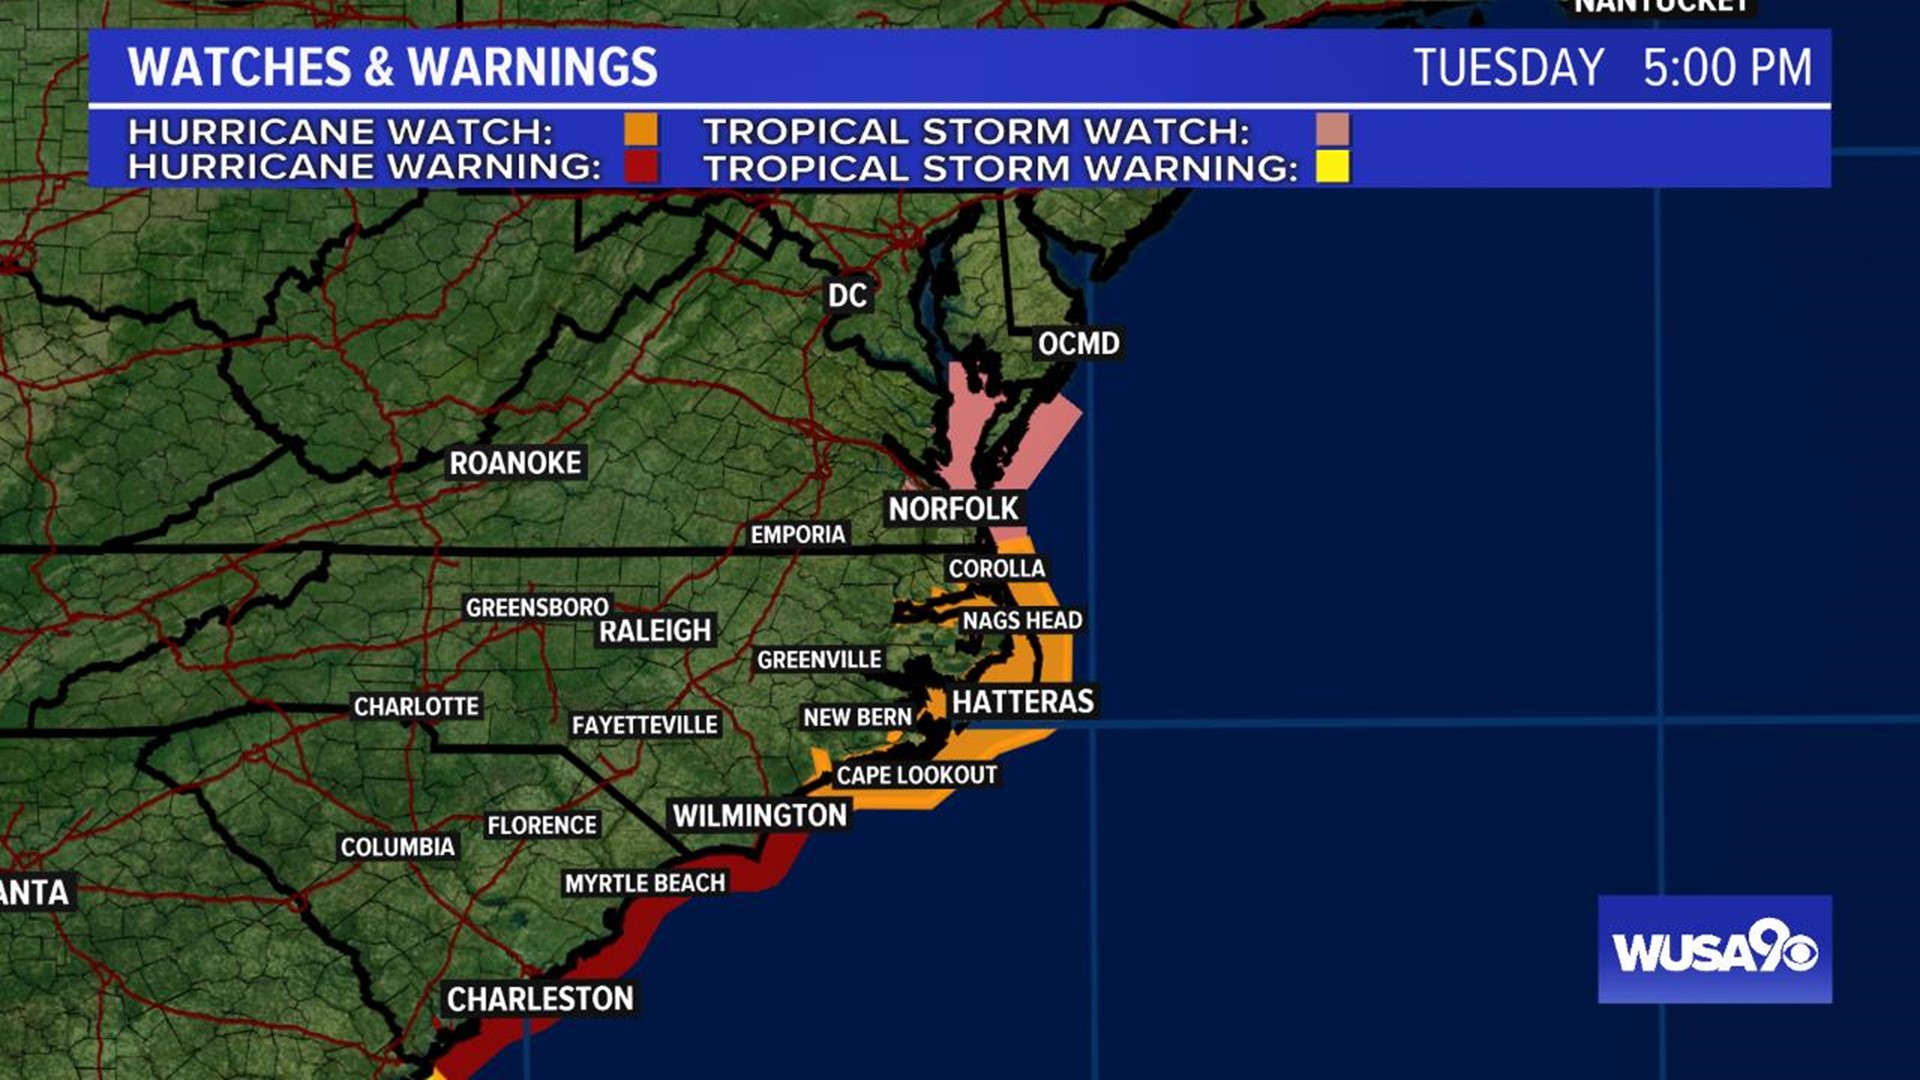 A Tropical Storm Watch has been issued from the North Carolina/Virginia border northward to Chincoteague, Virginia, and for the Chesapeake Bay from Smith Point southward.